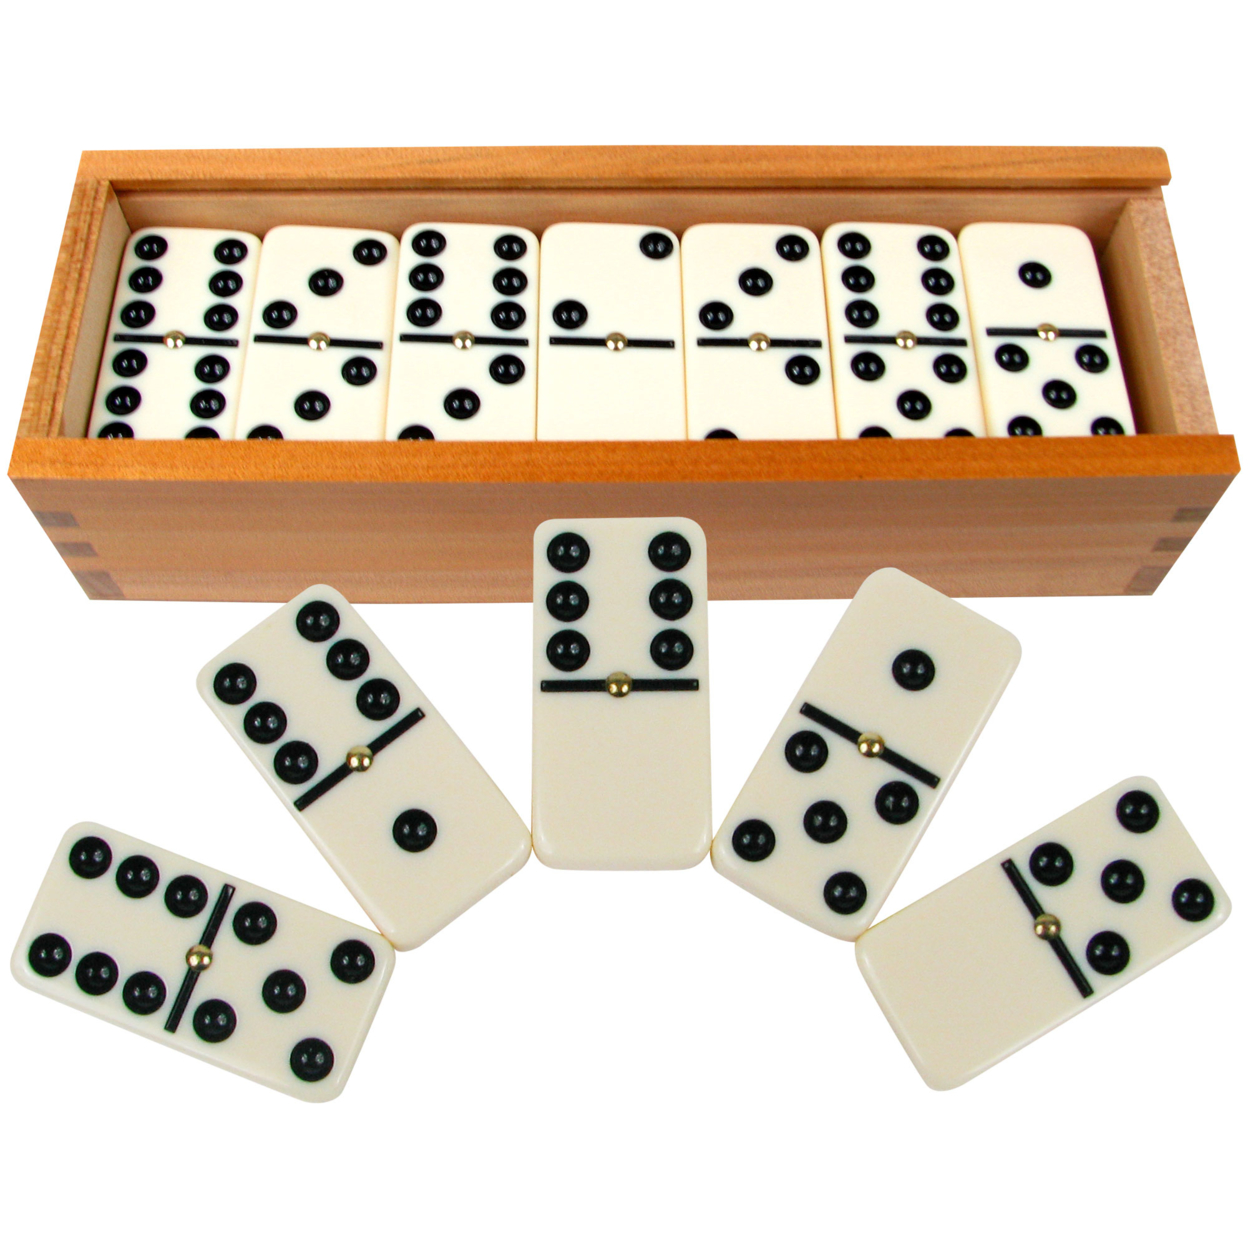 Premium Set Of 28 Double Six Dominoes W/ Wood Case With Pips For Easy Flips